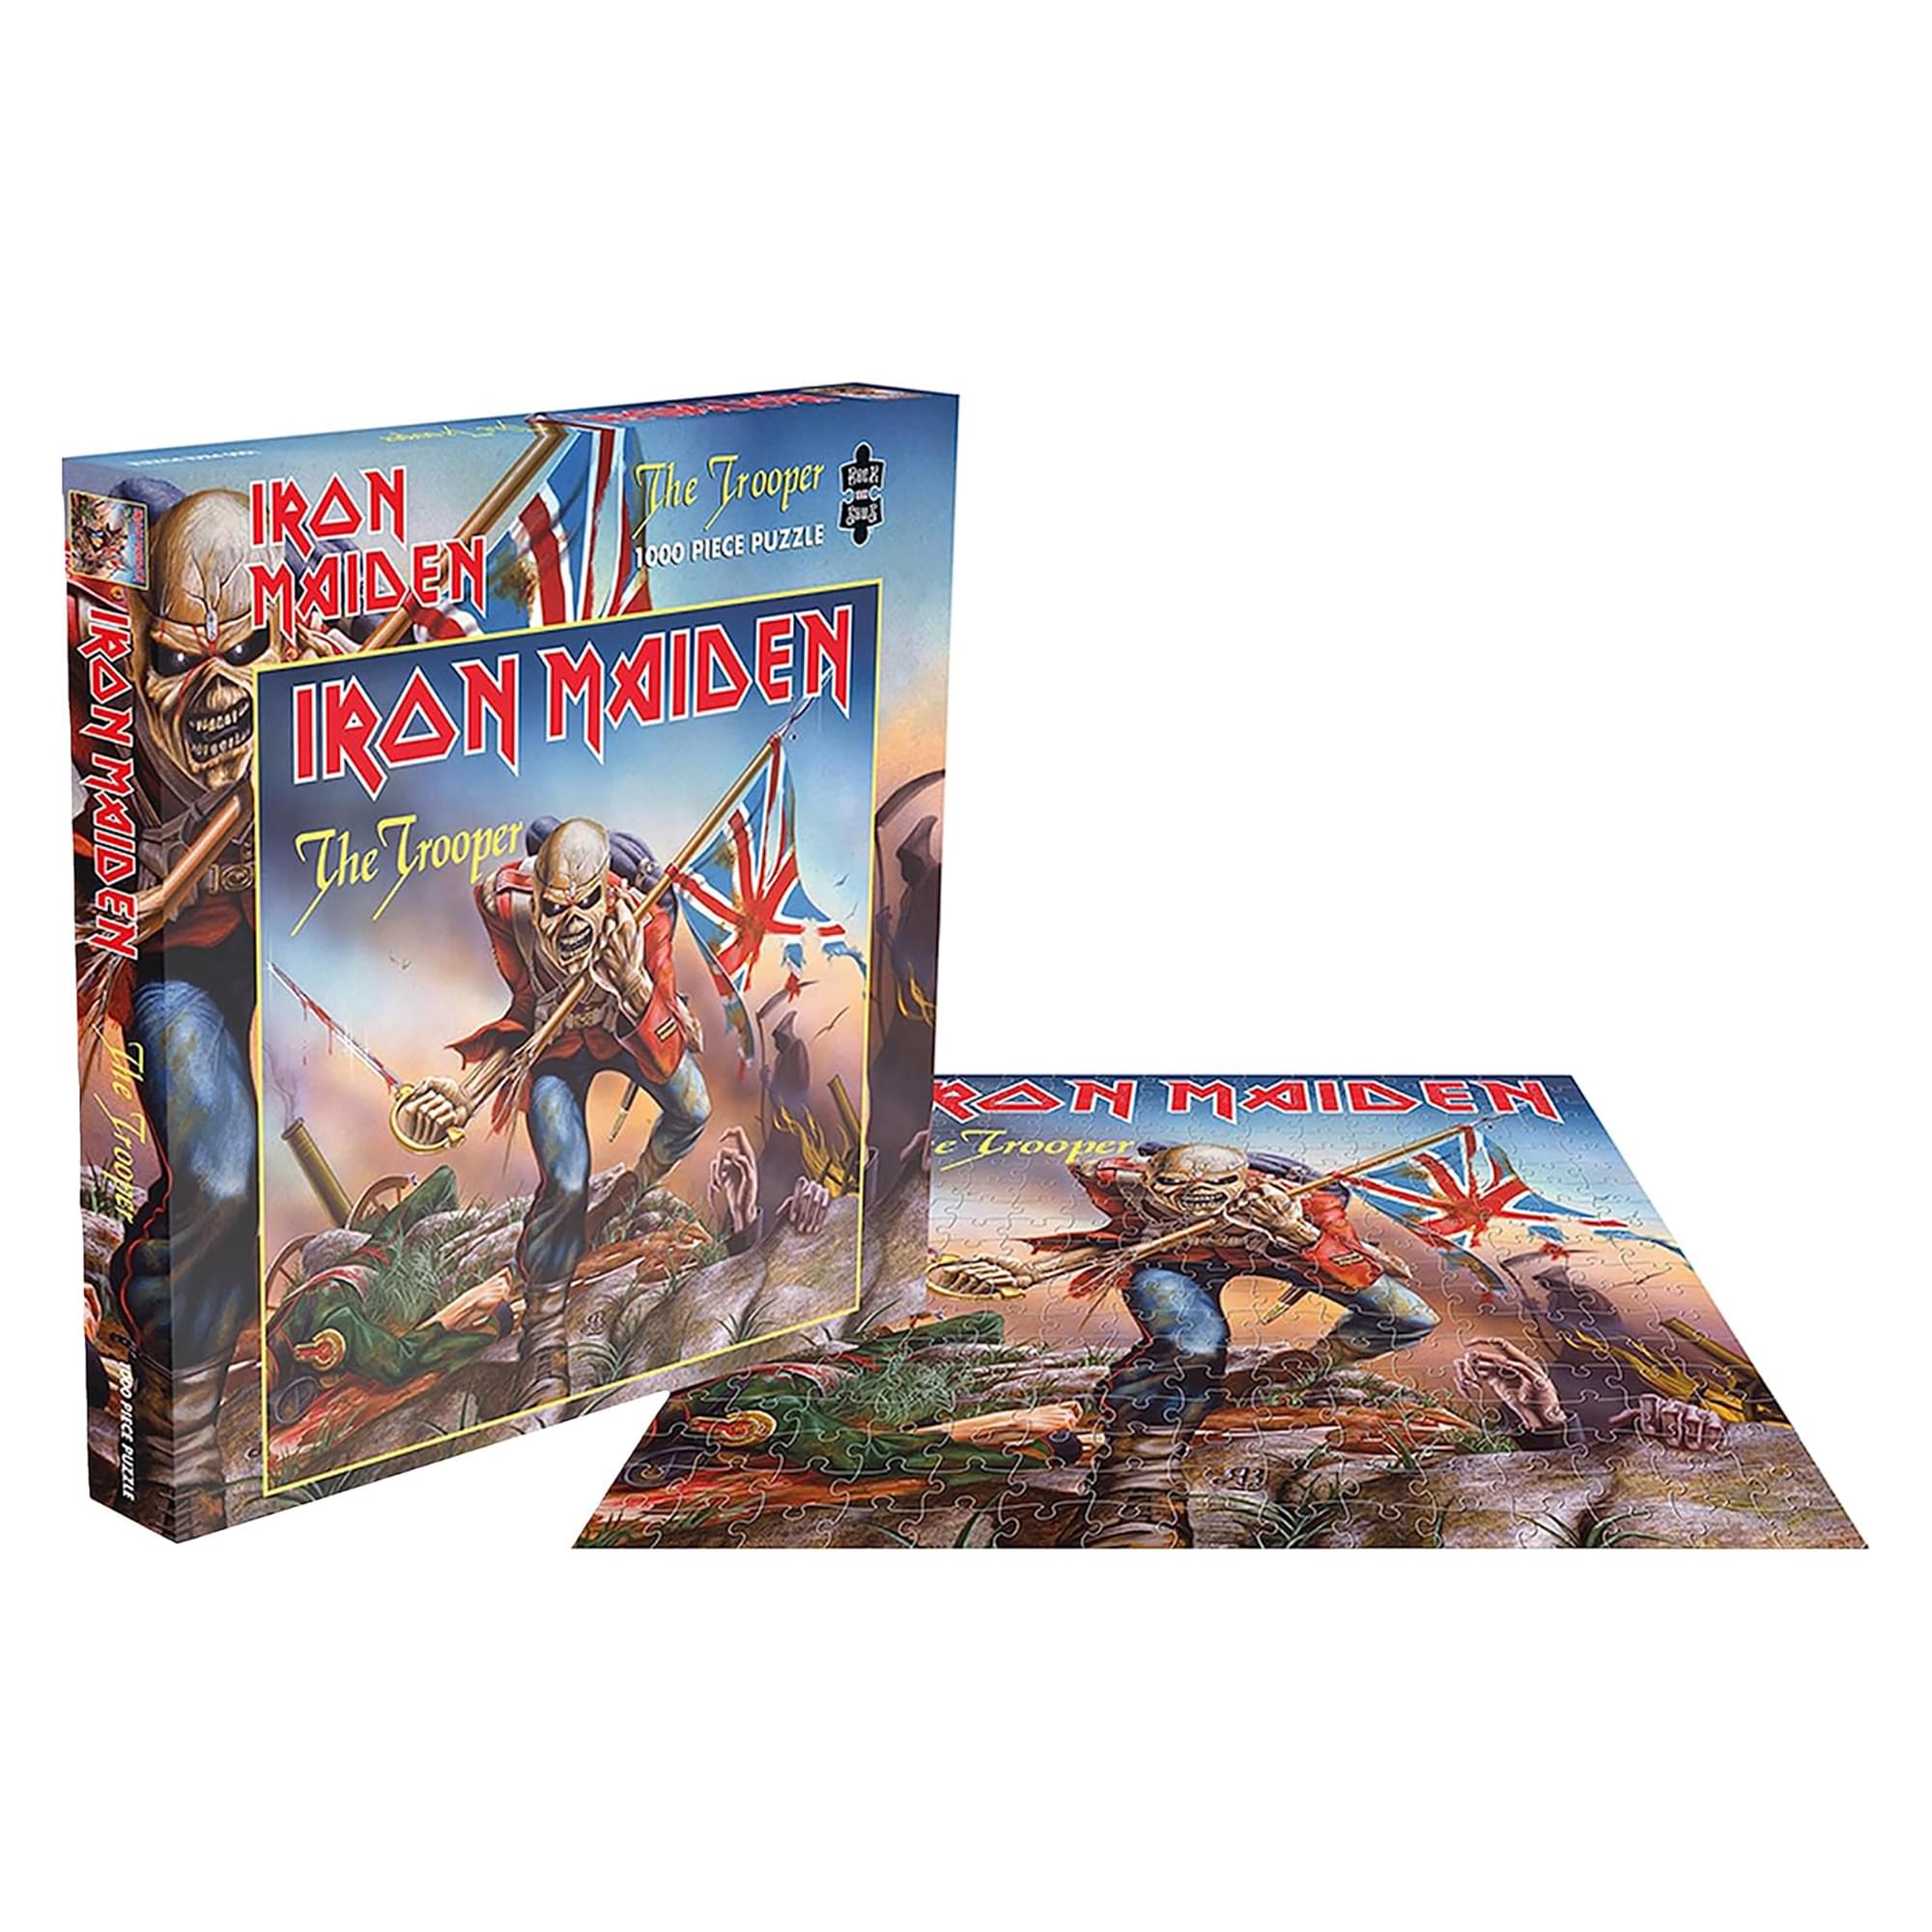 Iron Maiden The Trooper 1000 Piece Jigsaw Puzzle